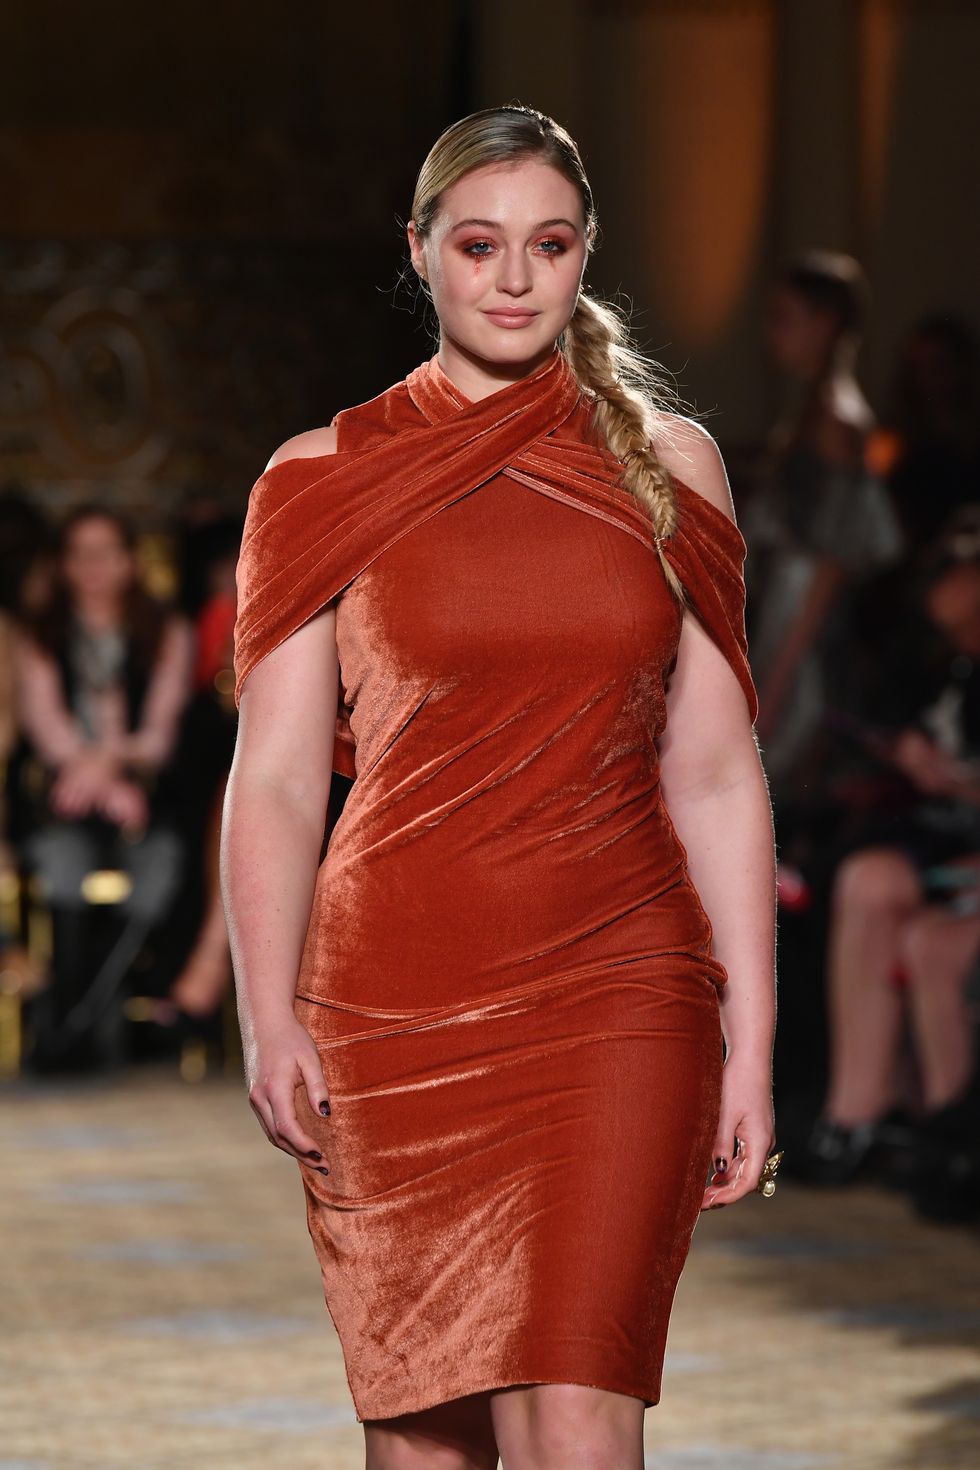 Iskra Lawrence at Christian Siriano | ELLE UK